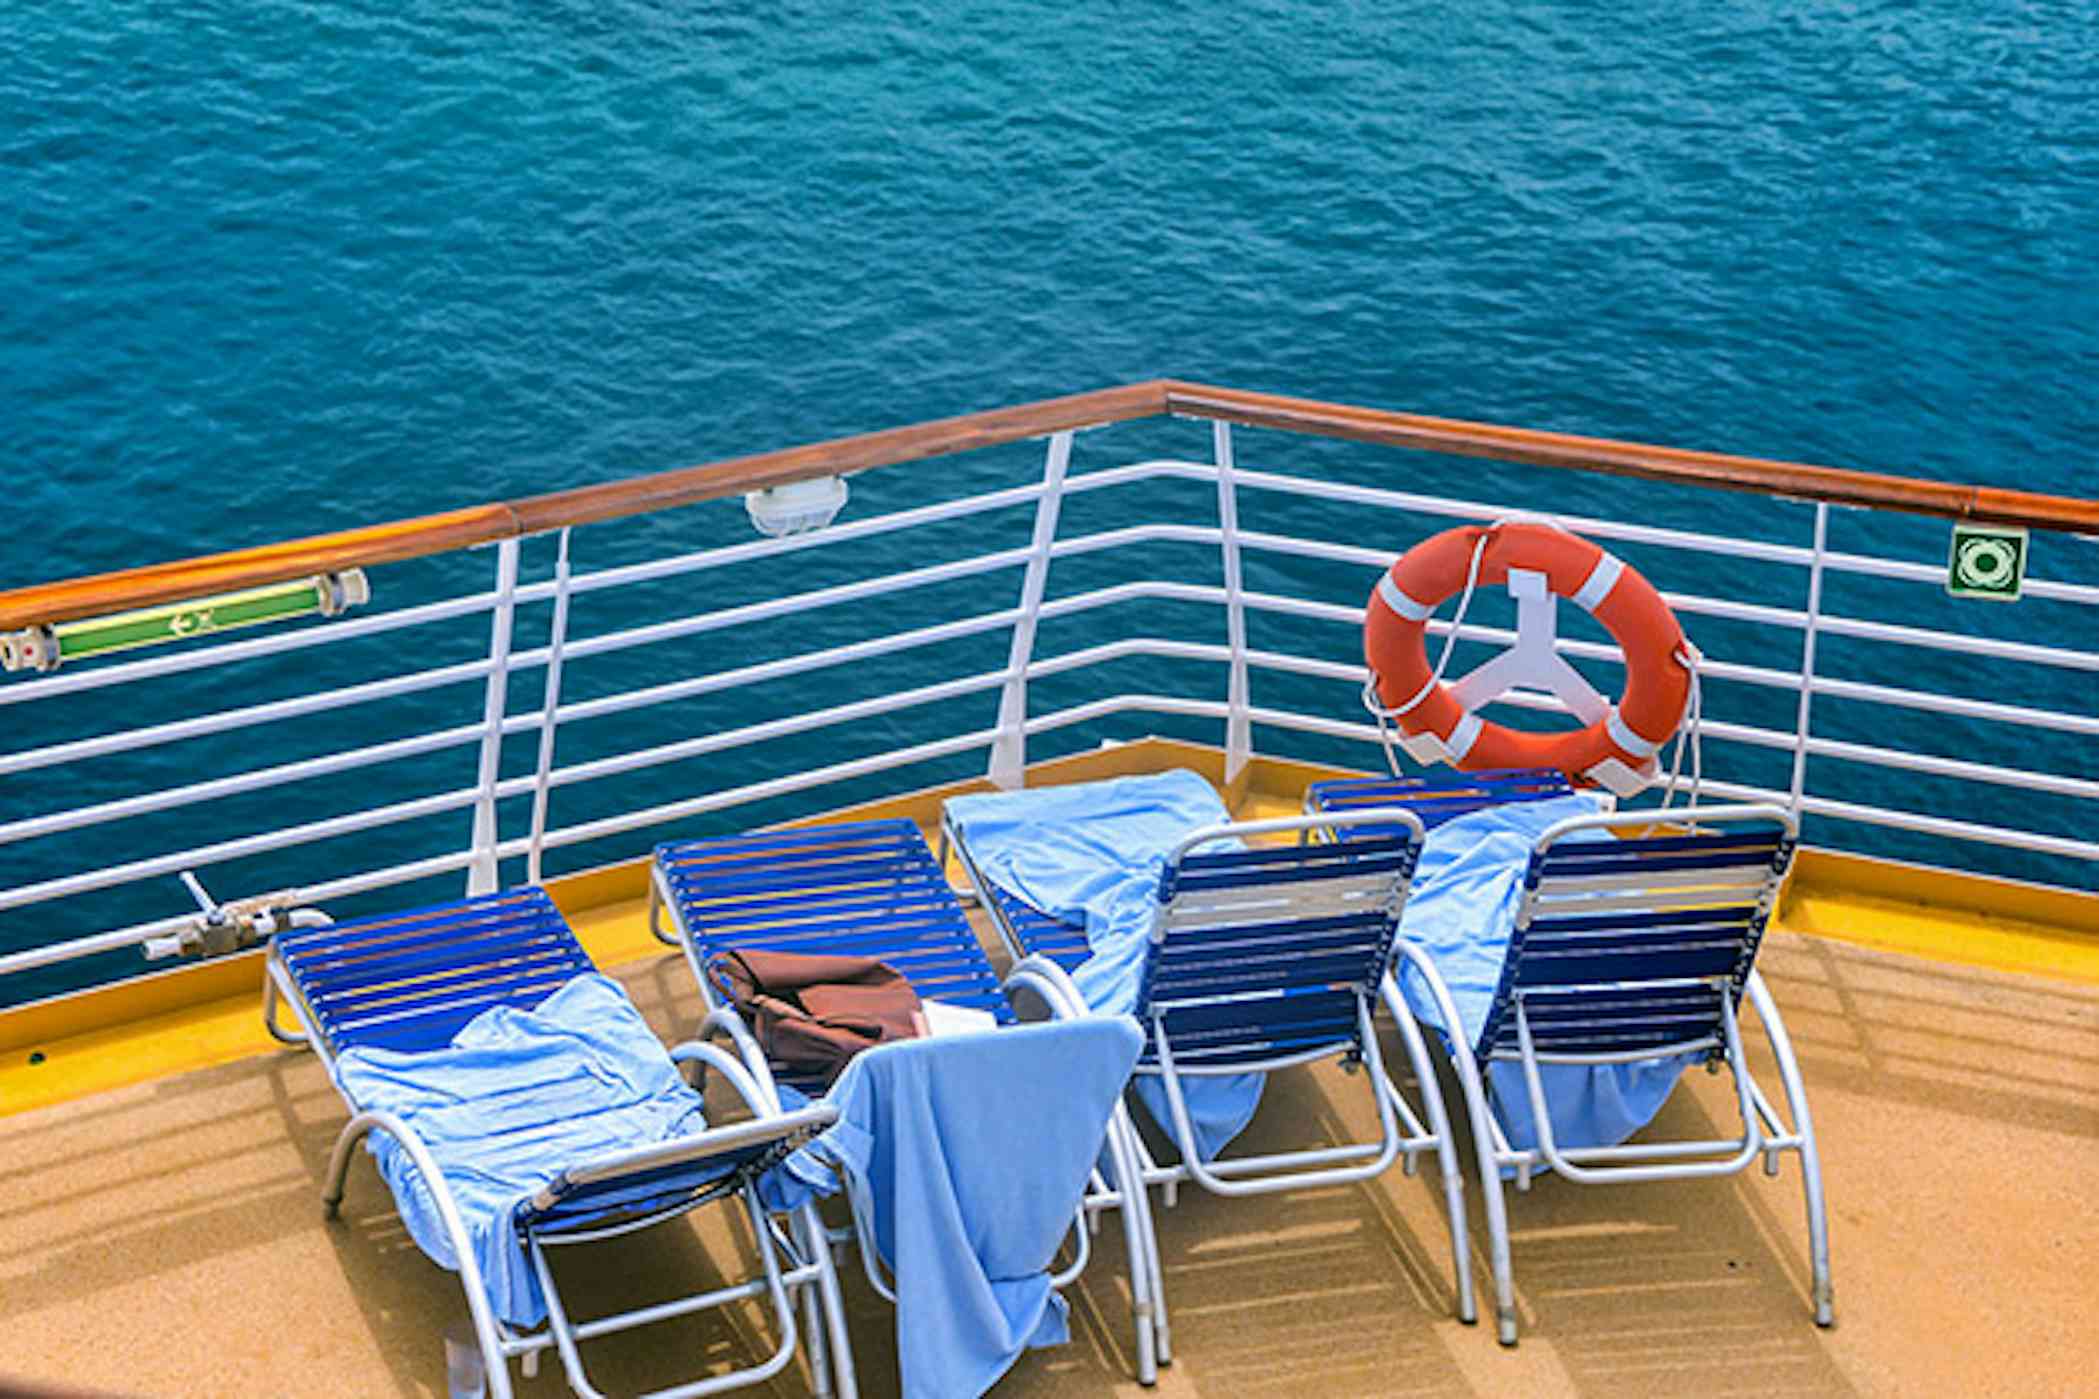 6 Fun Duct Tape Rolls You Absolutely Need for Your Next Cruise